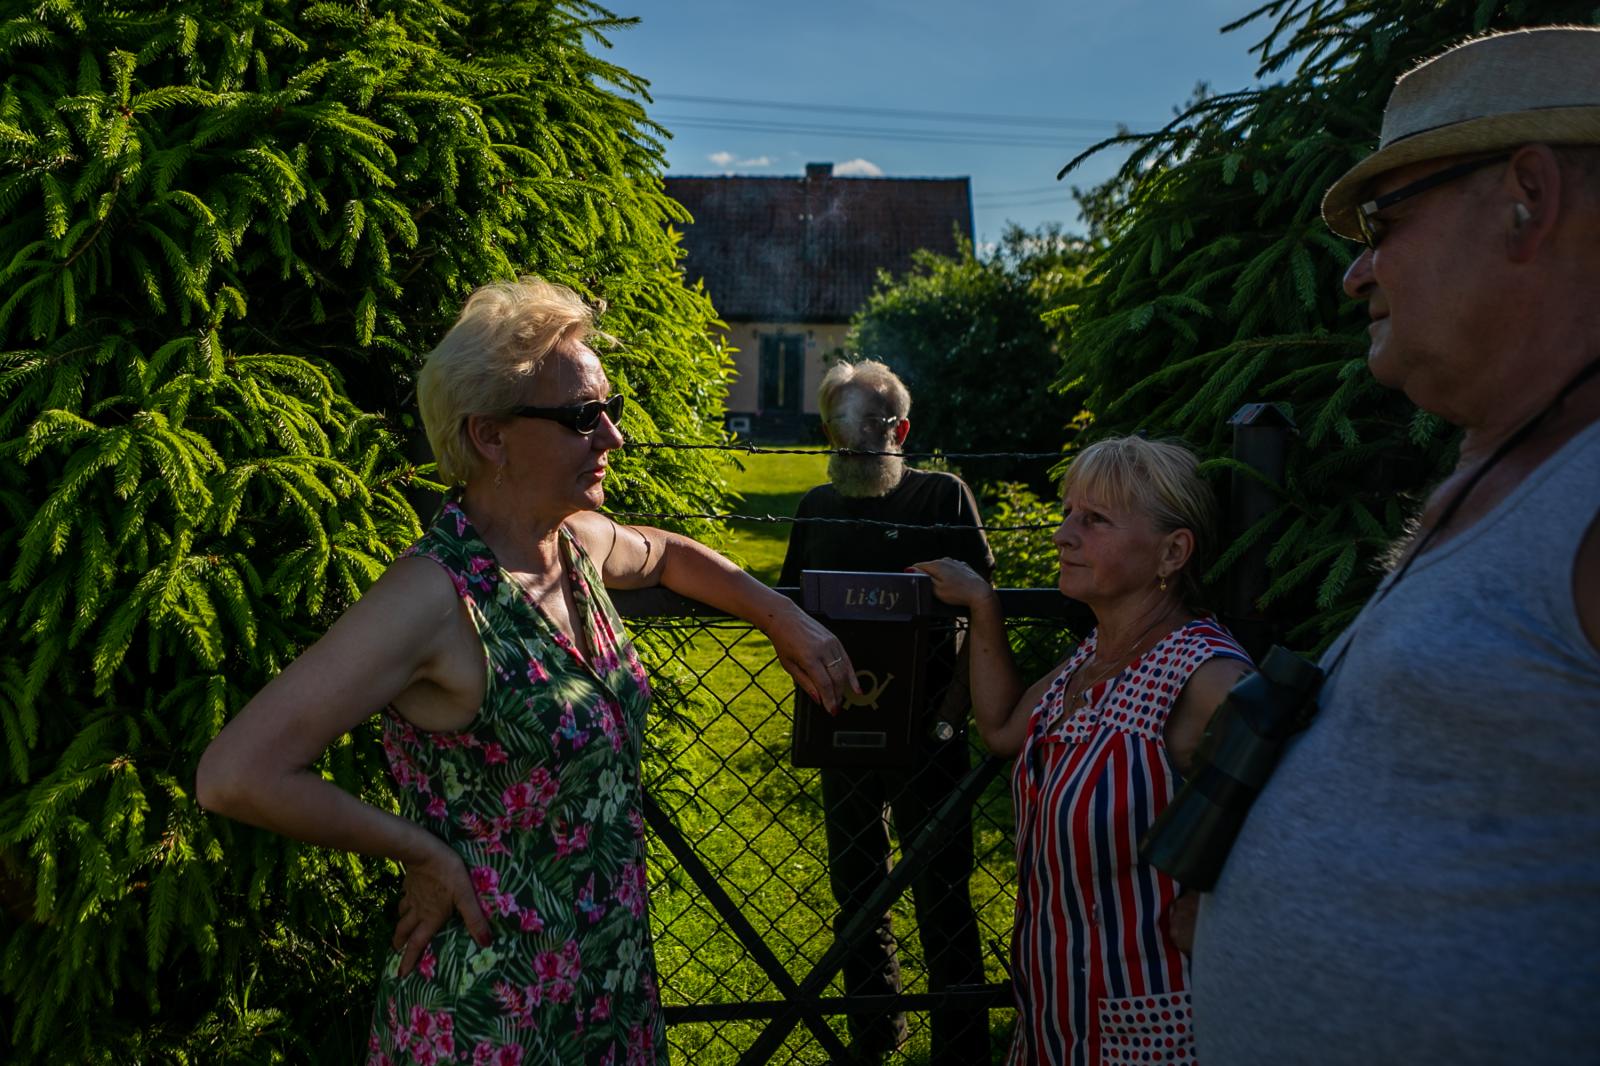 ‘The Russians could come any time’: fear at Suwałki Gap on EU border